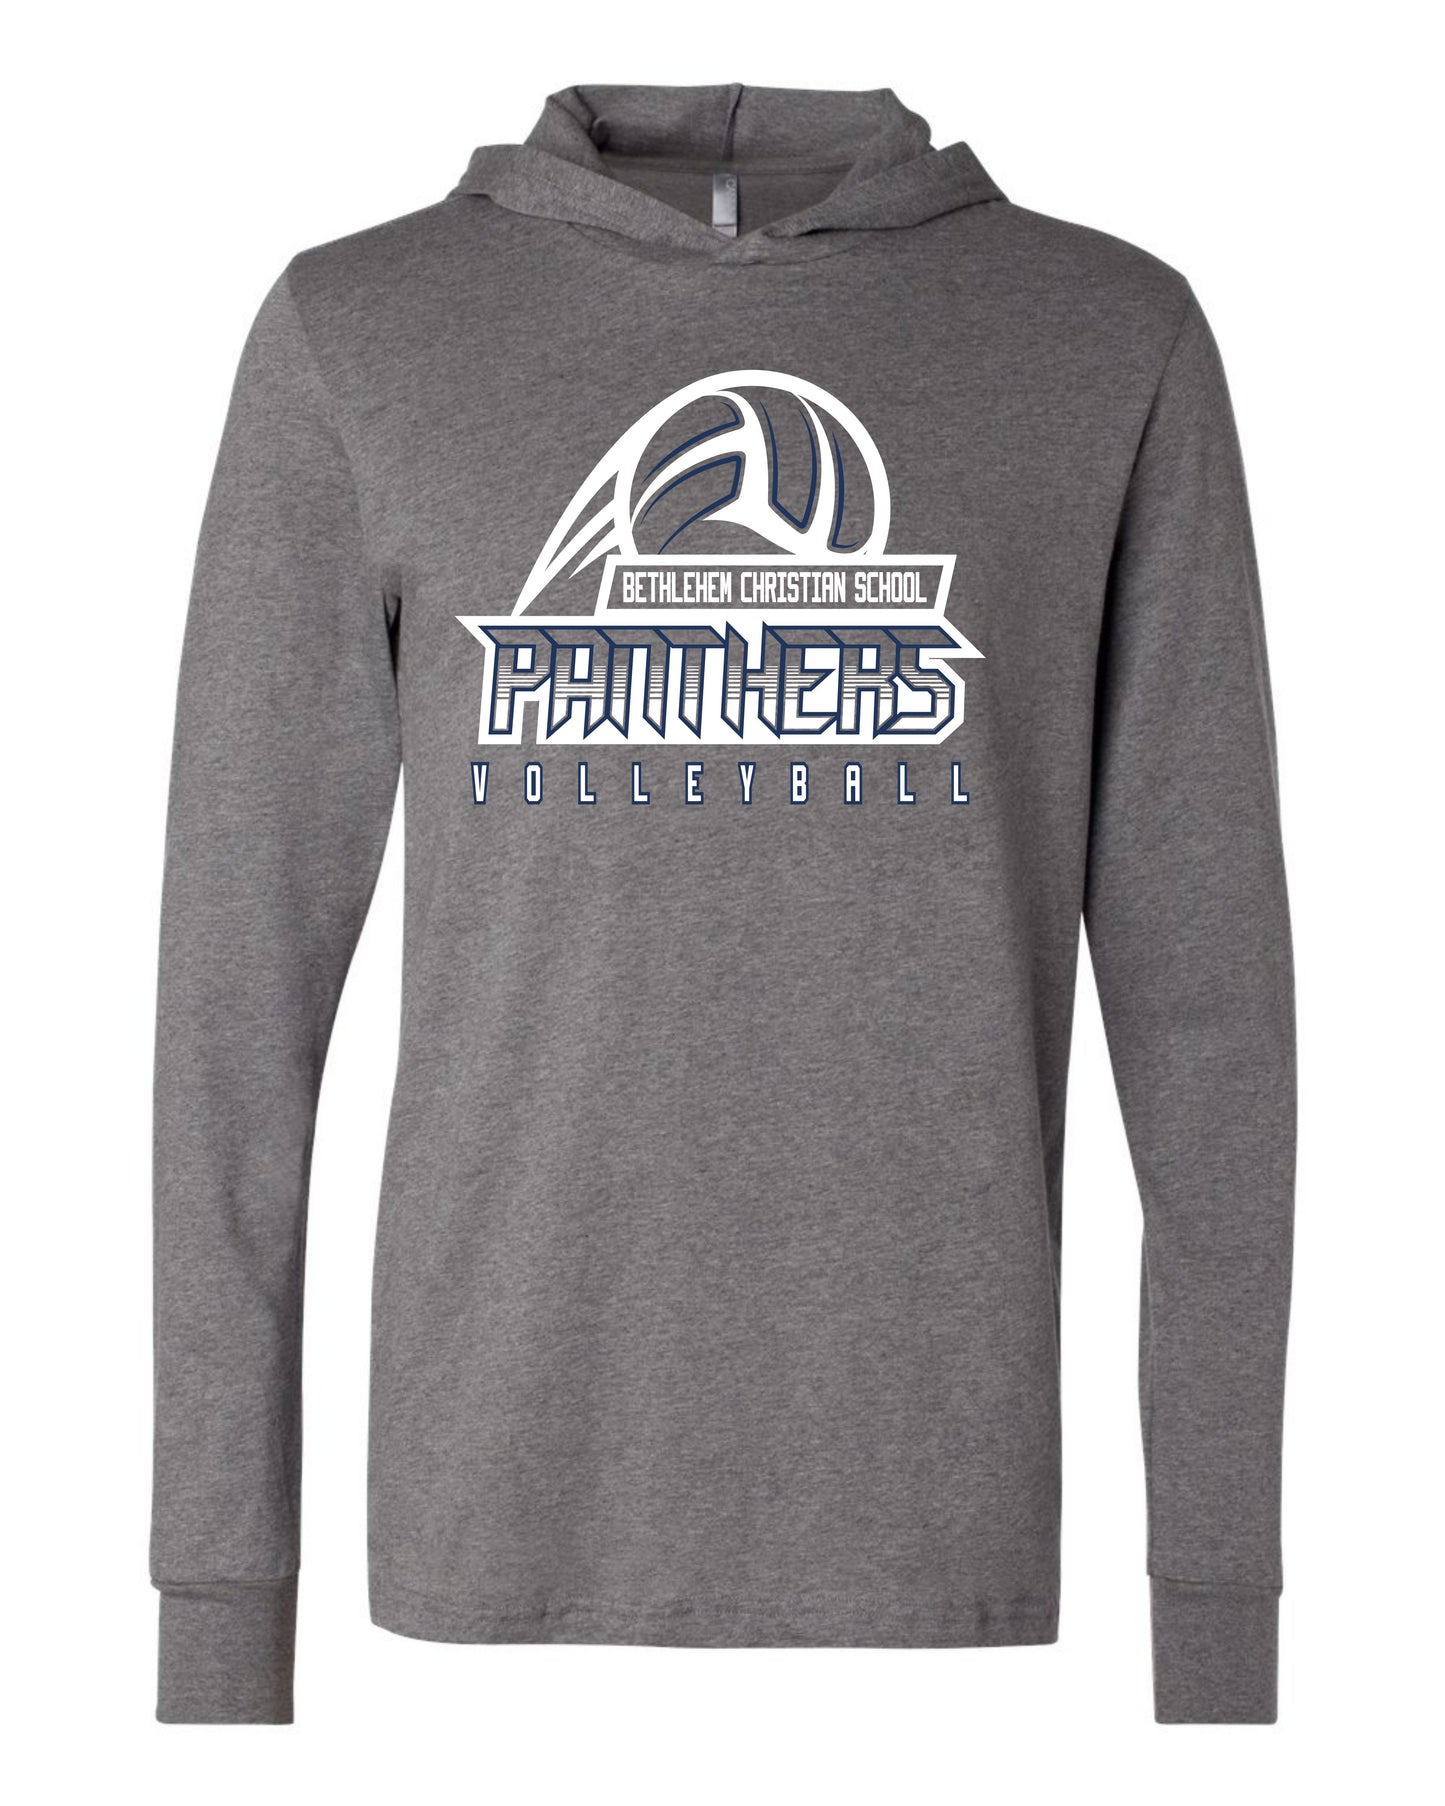 BCS Panthers Volleyball - Adult Hooded Long Sleeve